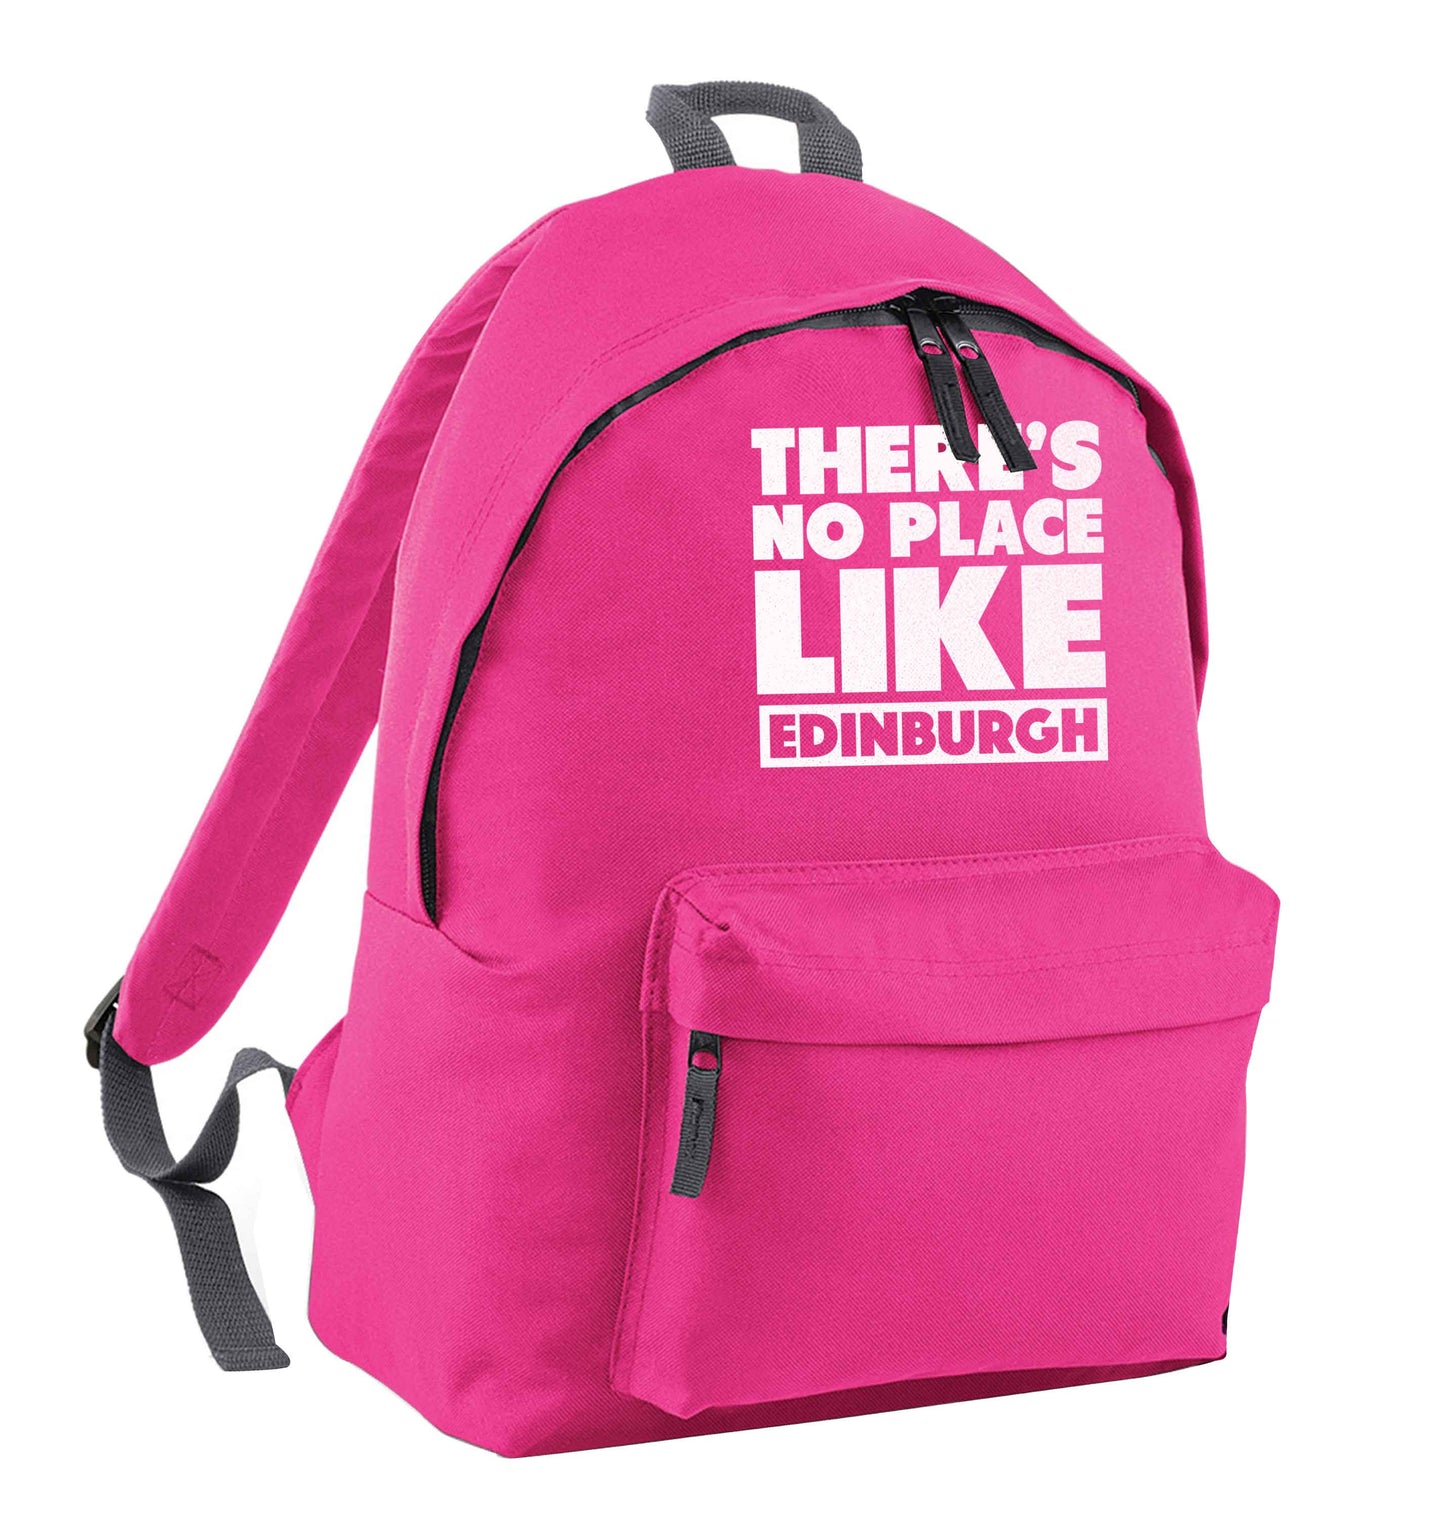 There's no place like Edinburgh pink children's backpack